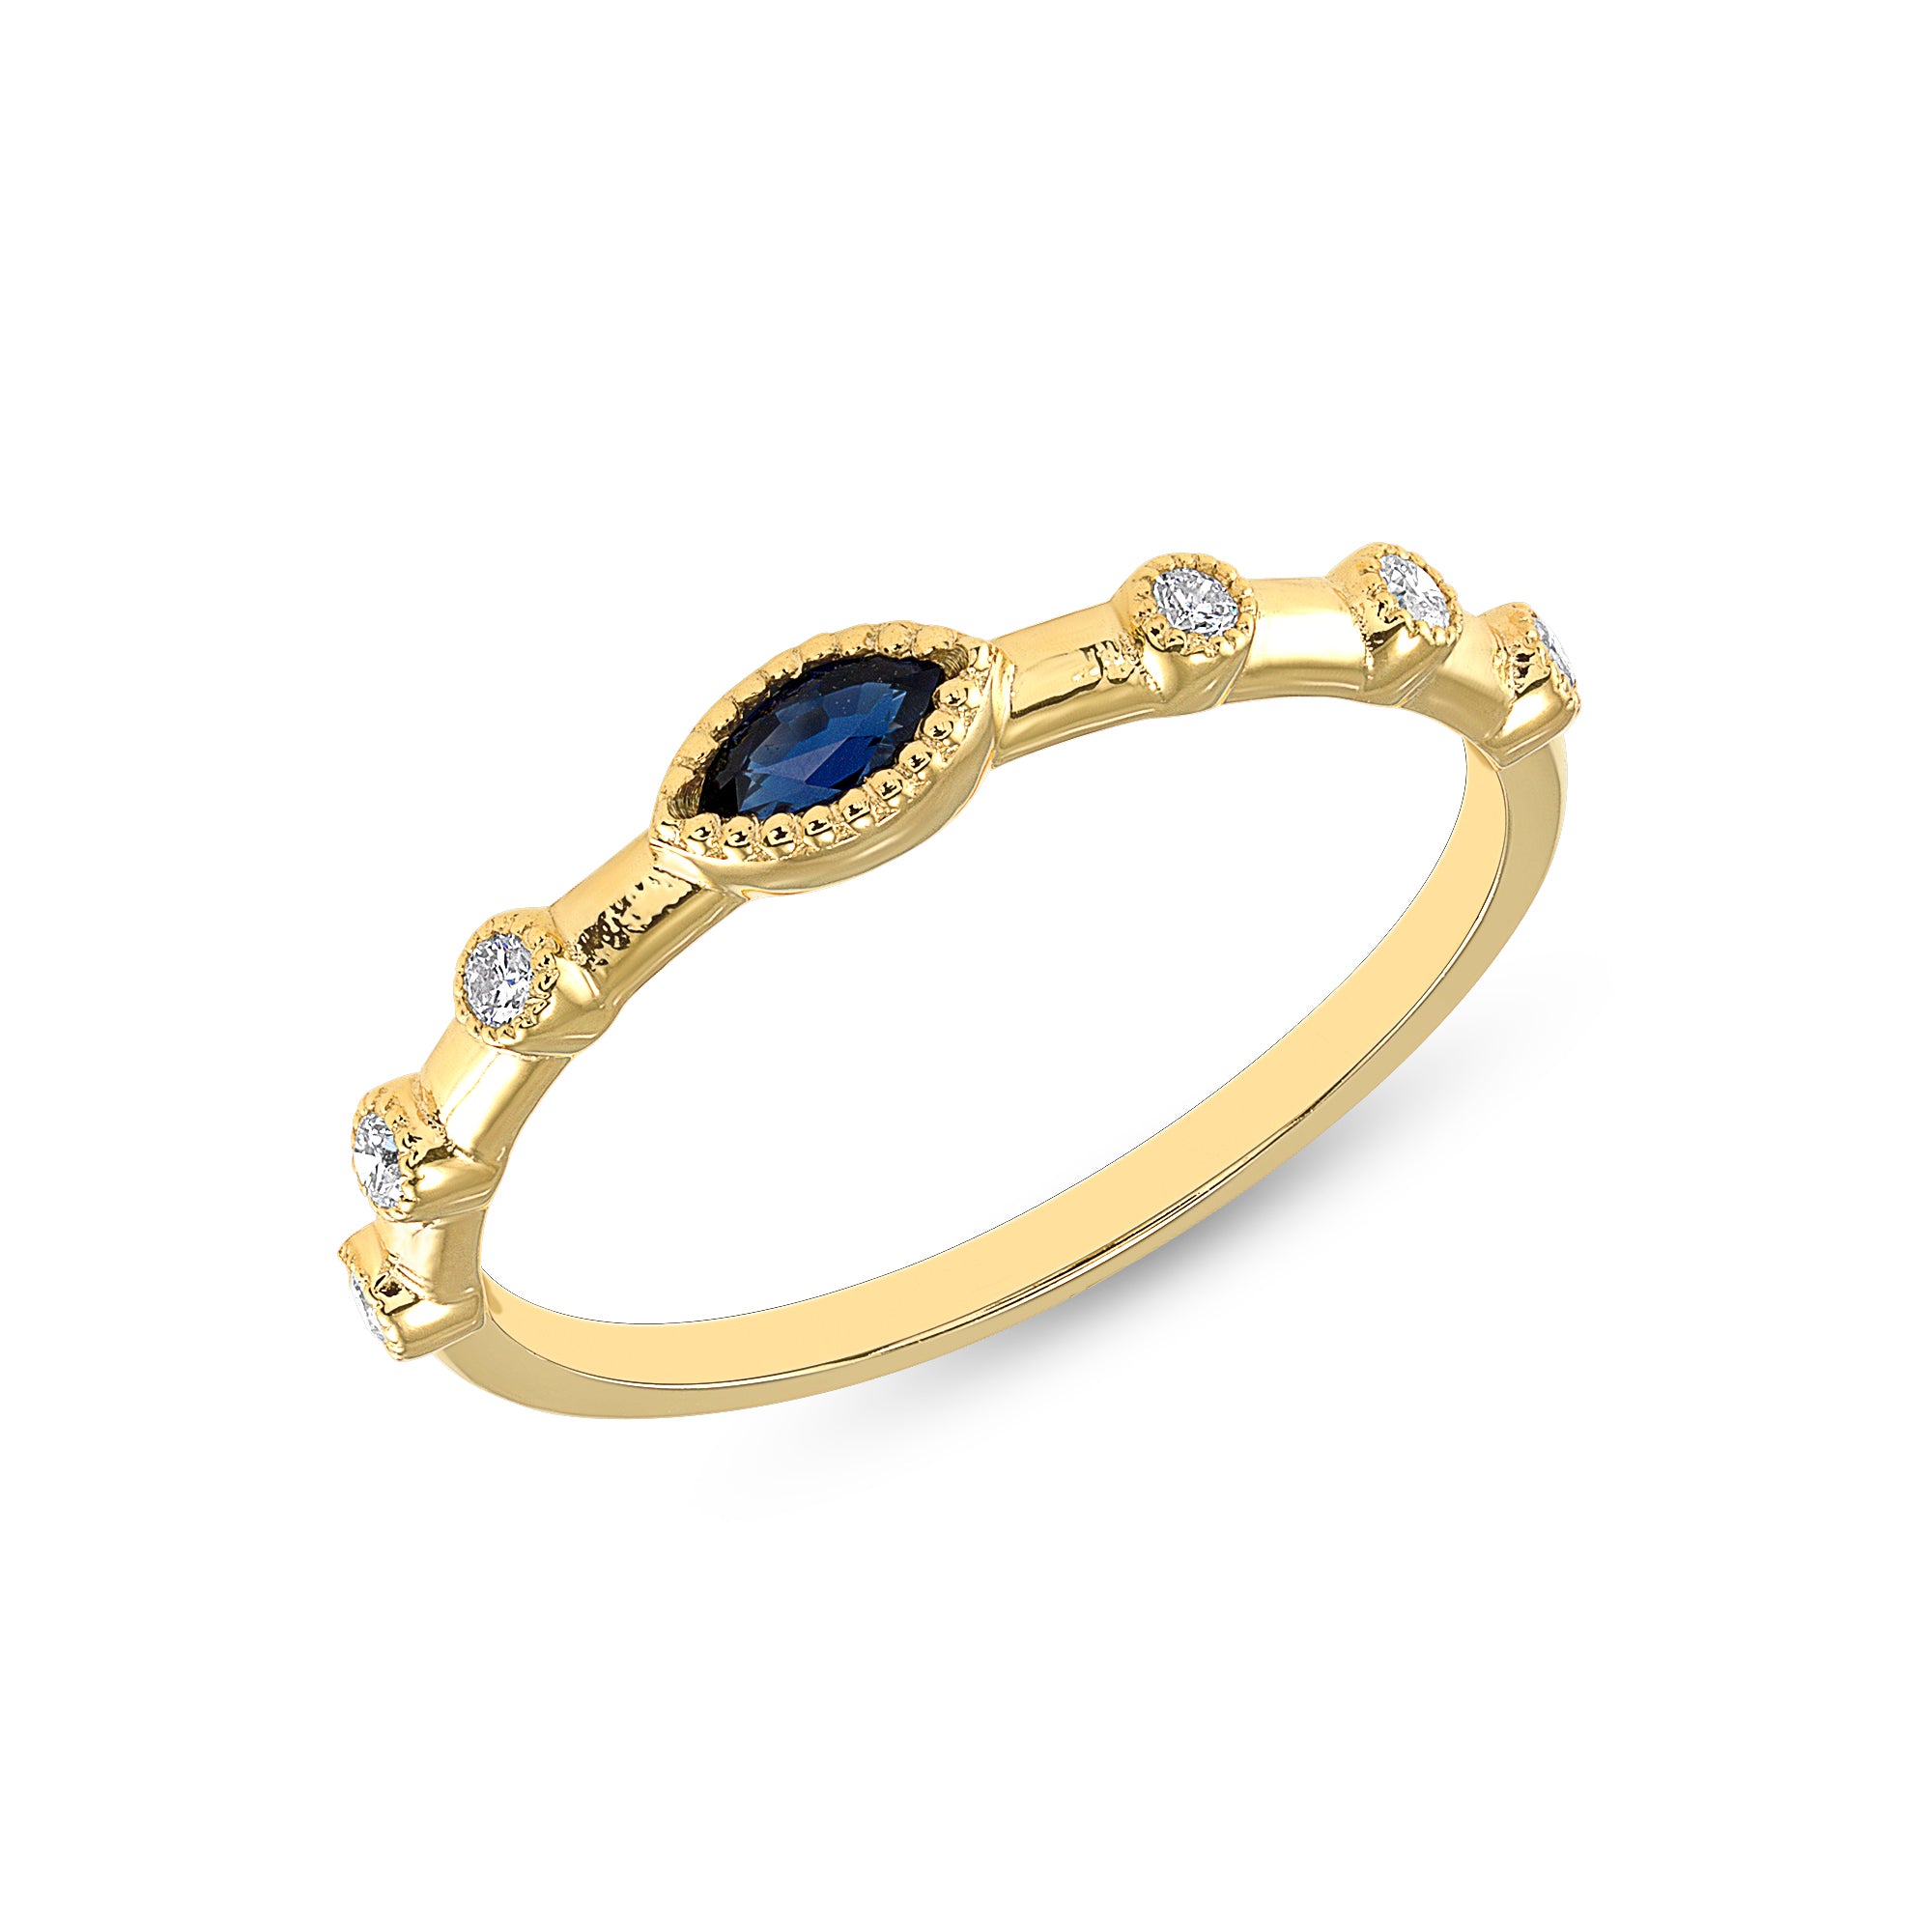 14K Yellow Gold Marquise Blue Sapphire & Diamond Bezel Set Stacking Band,  Color Stones, ABB-106-BSD, blue sapphire and diamond stacking ring, blue sapphire marquise design ring, Color Stones, Belarino